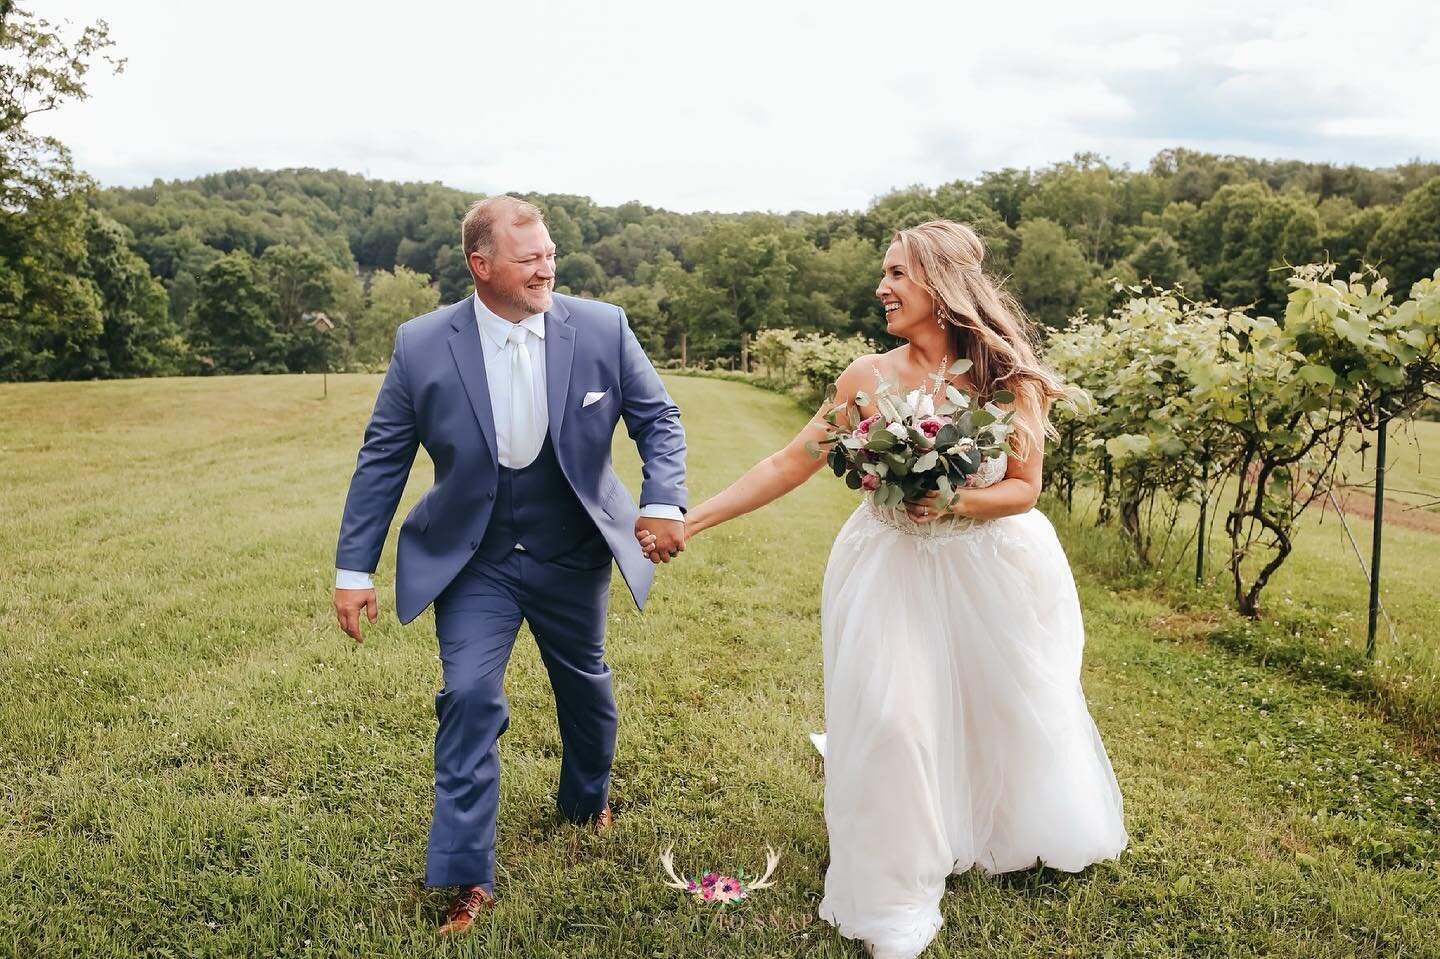 🌸 TALK ABOUT A TEAR JERKER 🌸

April &amp; Josh we&rsquo;re married last week and we still can&rsquo;t stop gushing over how precious it was to watch their two families become one. 

Also, huge thanks to their photographer Holly for grabbing these A